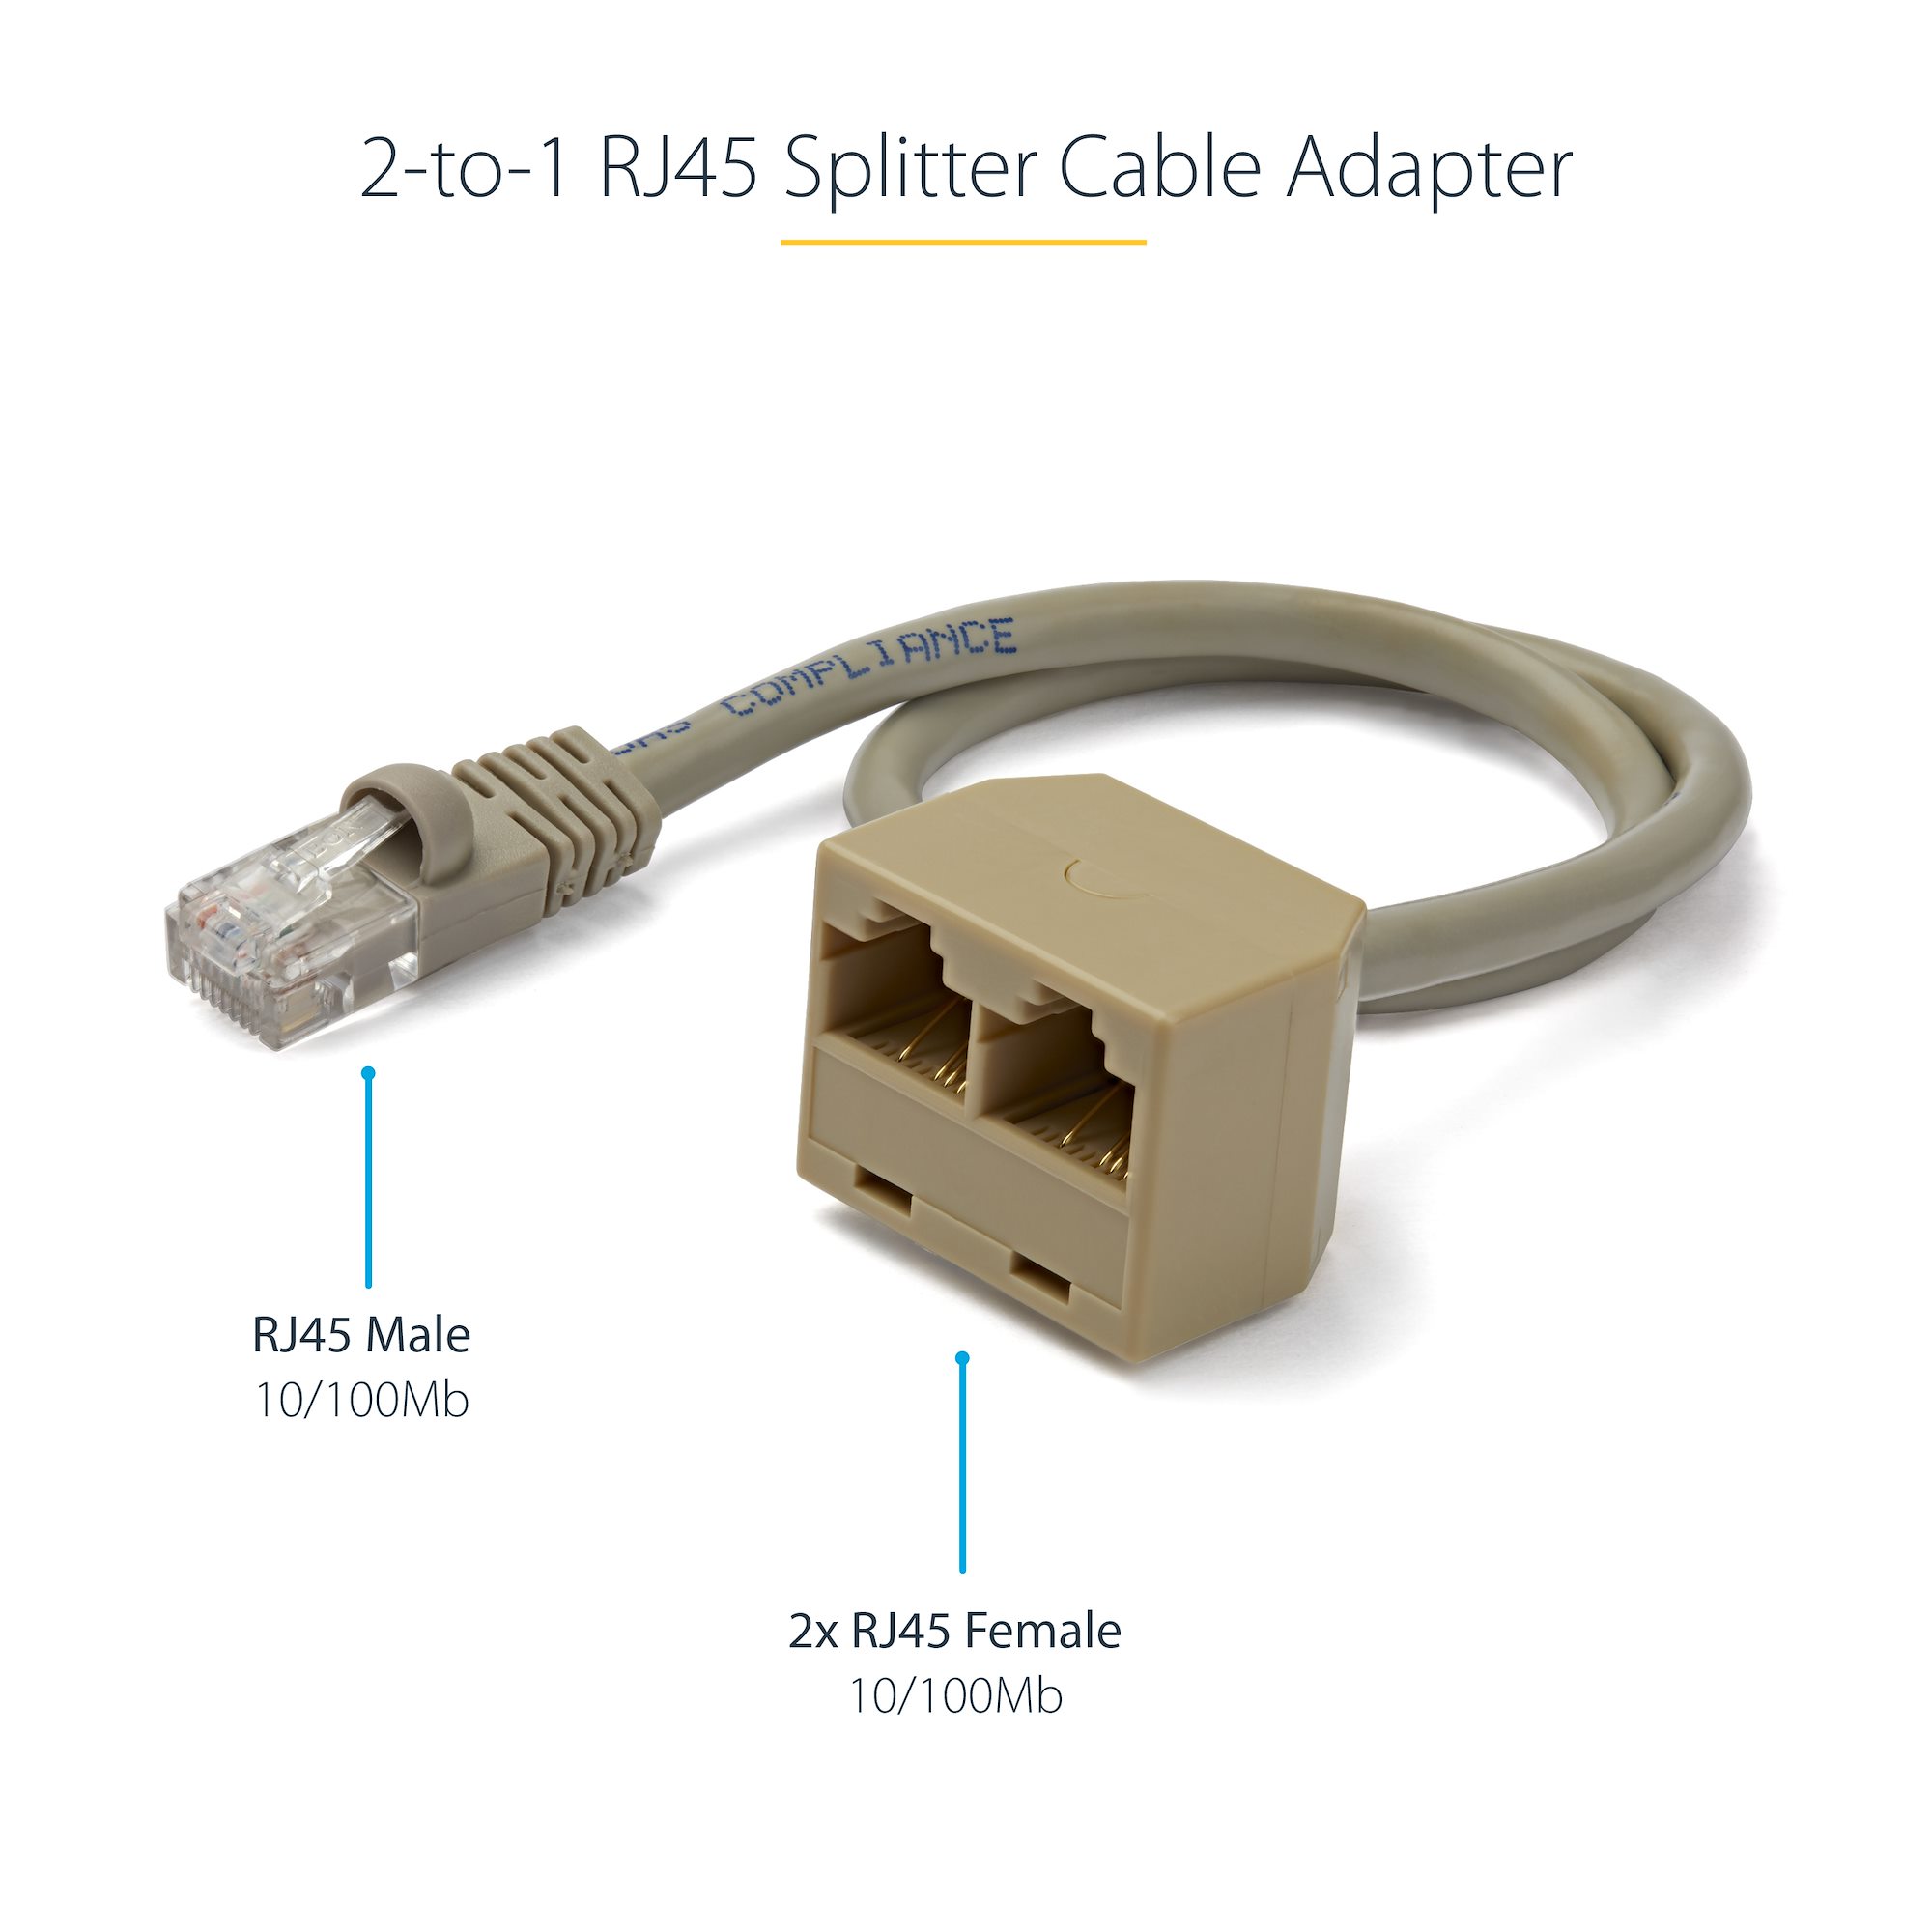  RJ45 Ethernet Splitter Cable, 1 Male to 4 Female RJ45 Splitter  Adapter, 1 to 4 Port RJ45 Ethernet Splitter Cable for Home Office Socket  Connector : Electronics